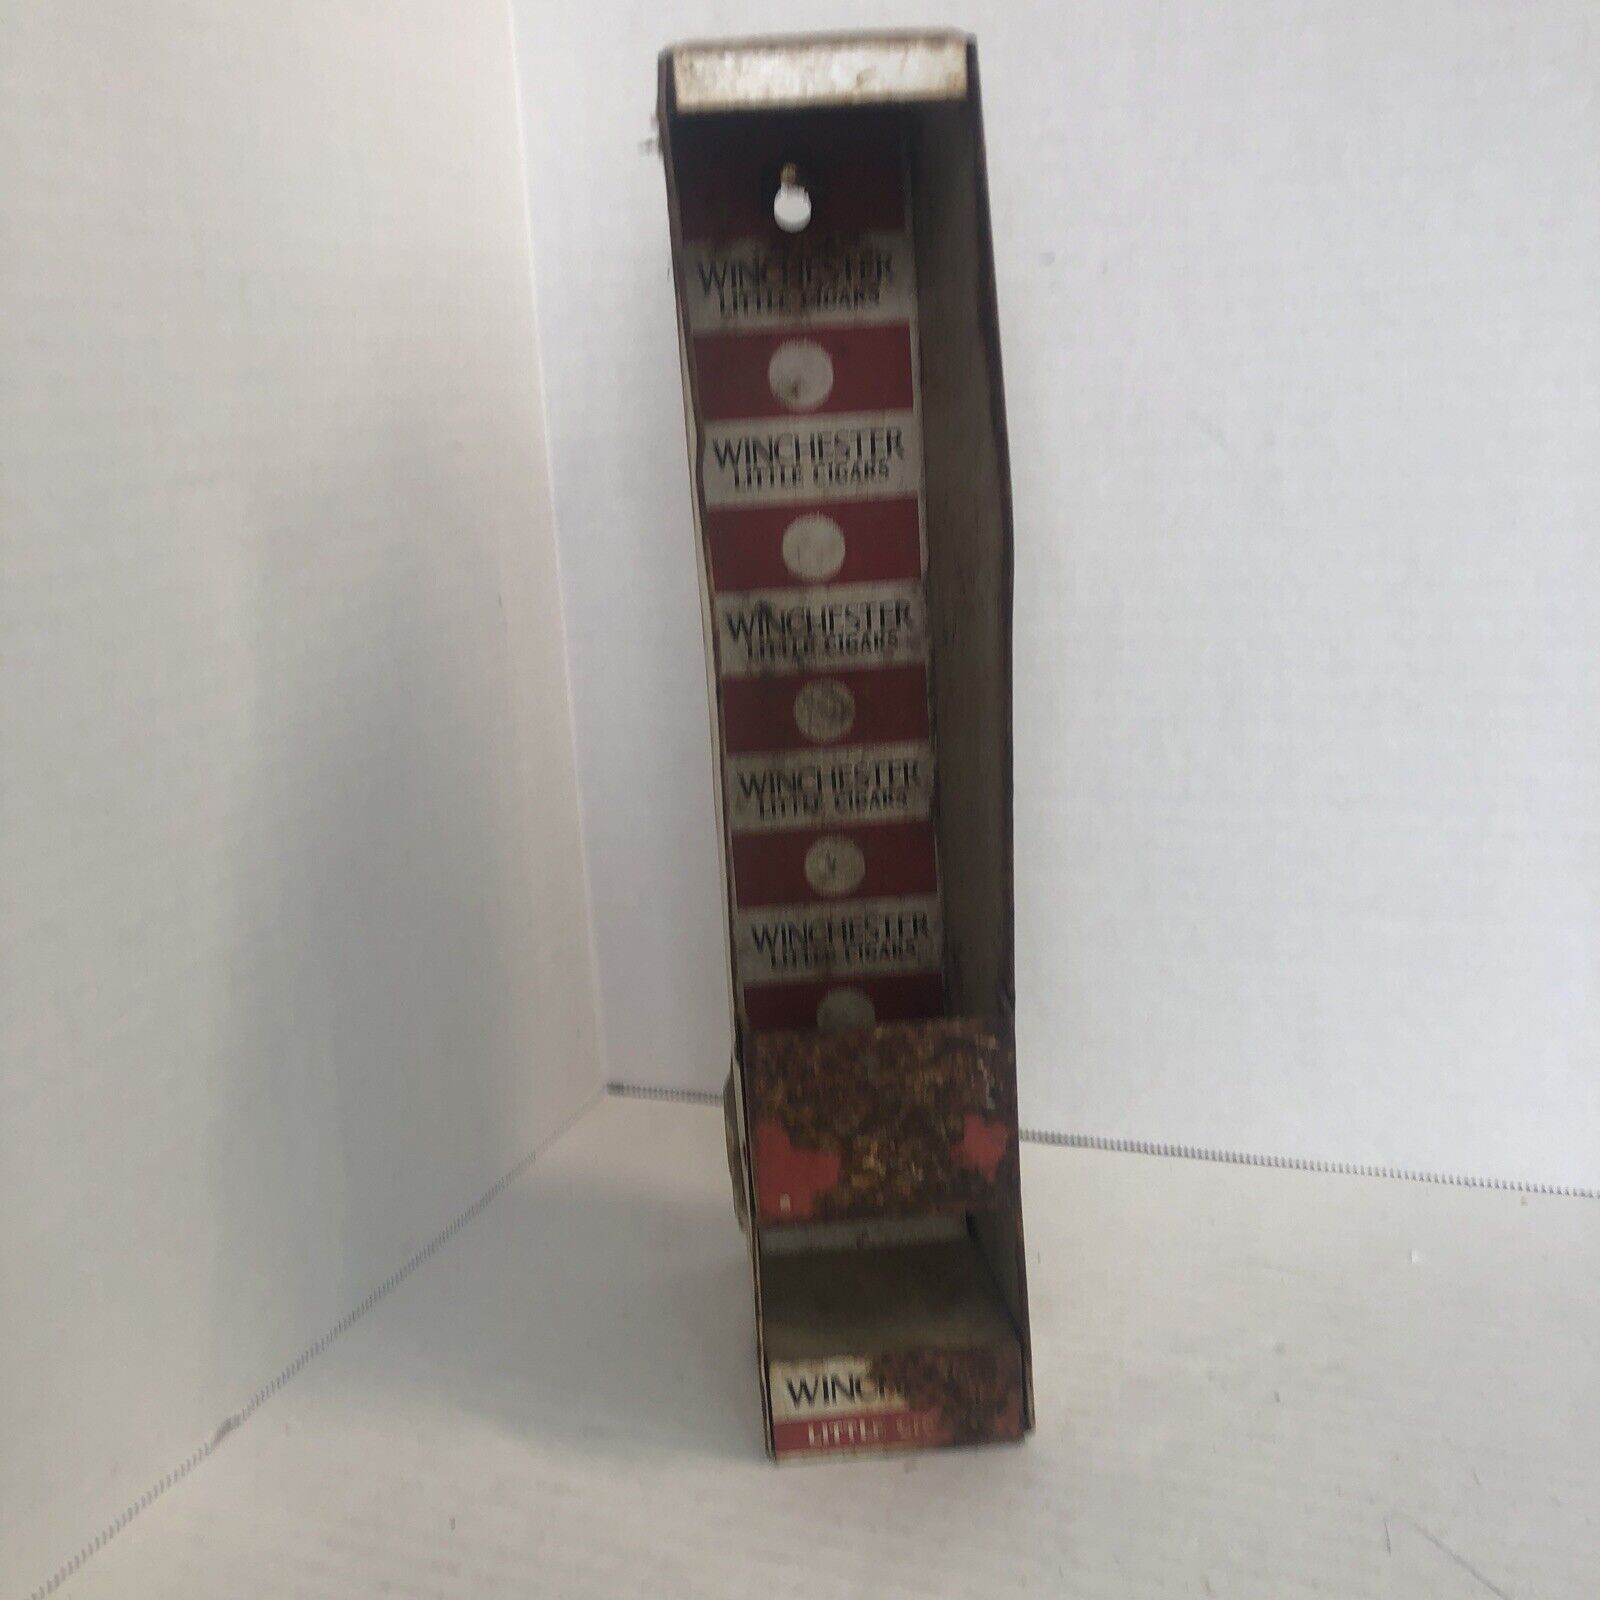 Vintage Original Winchester Little Cigars Counter Display AMD Co. Made in USA